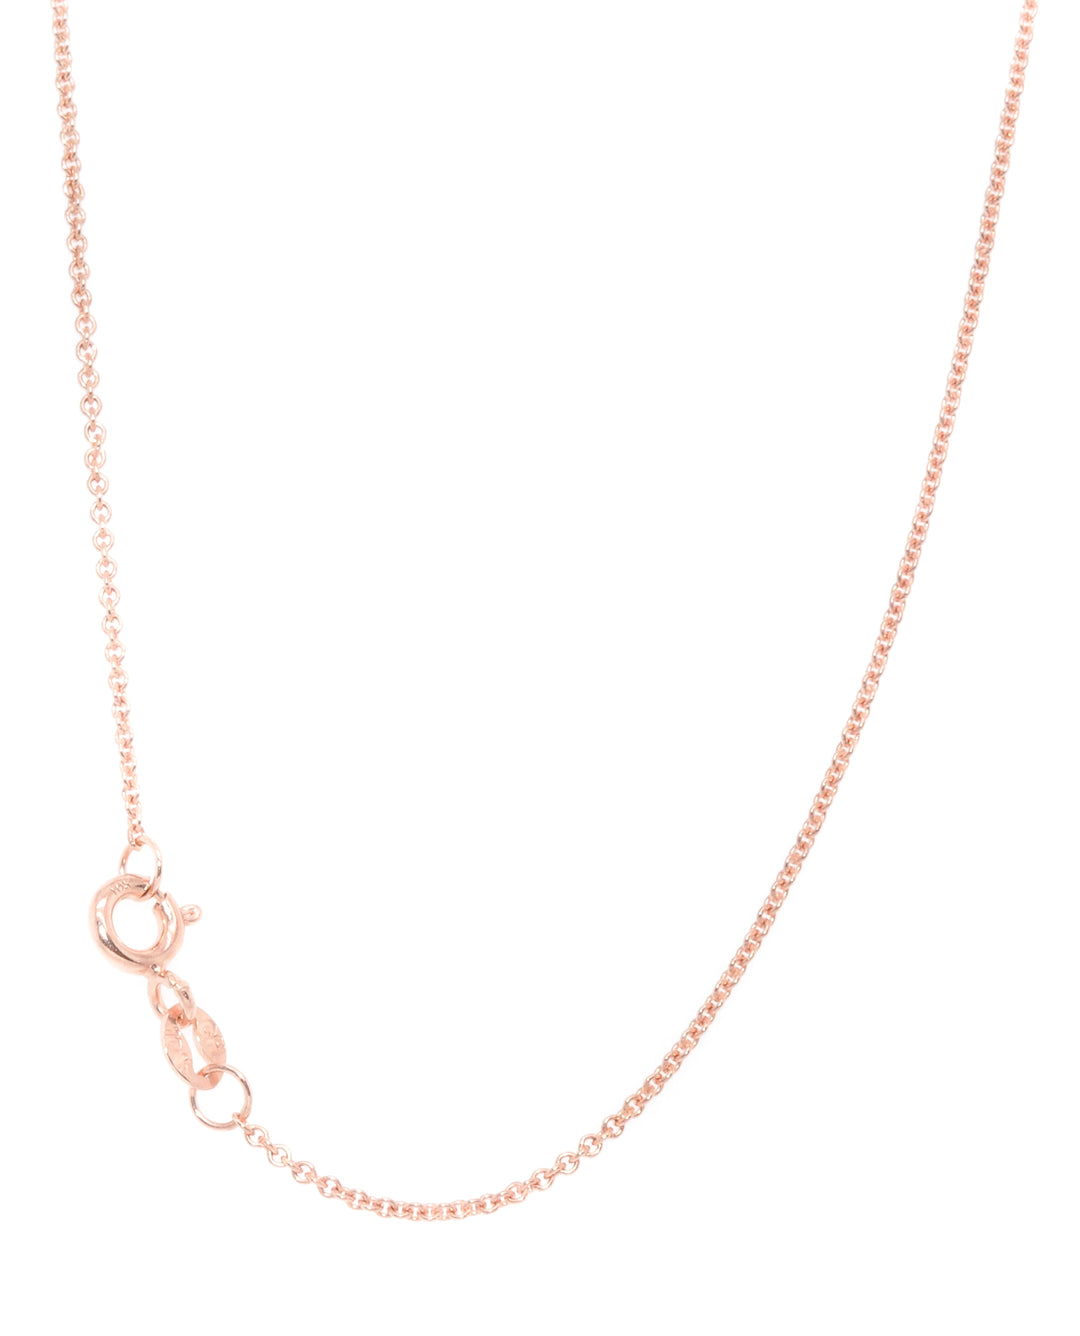 10KT Rose Gold 16" .5MM Rolo Chain.